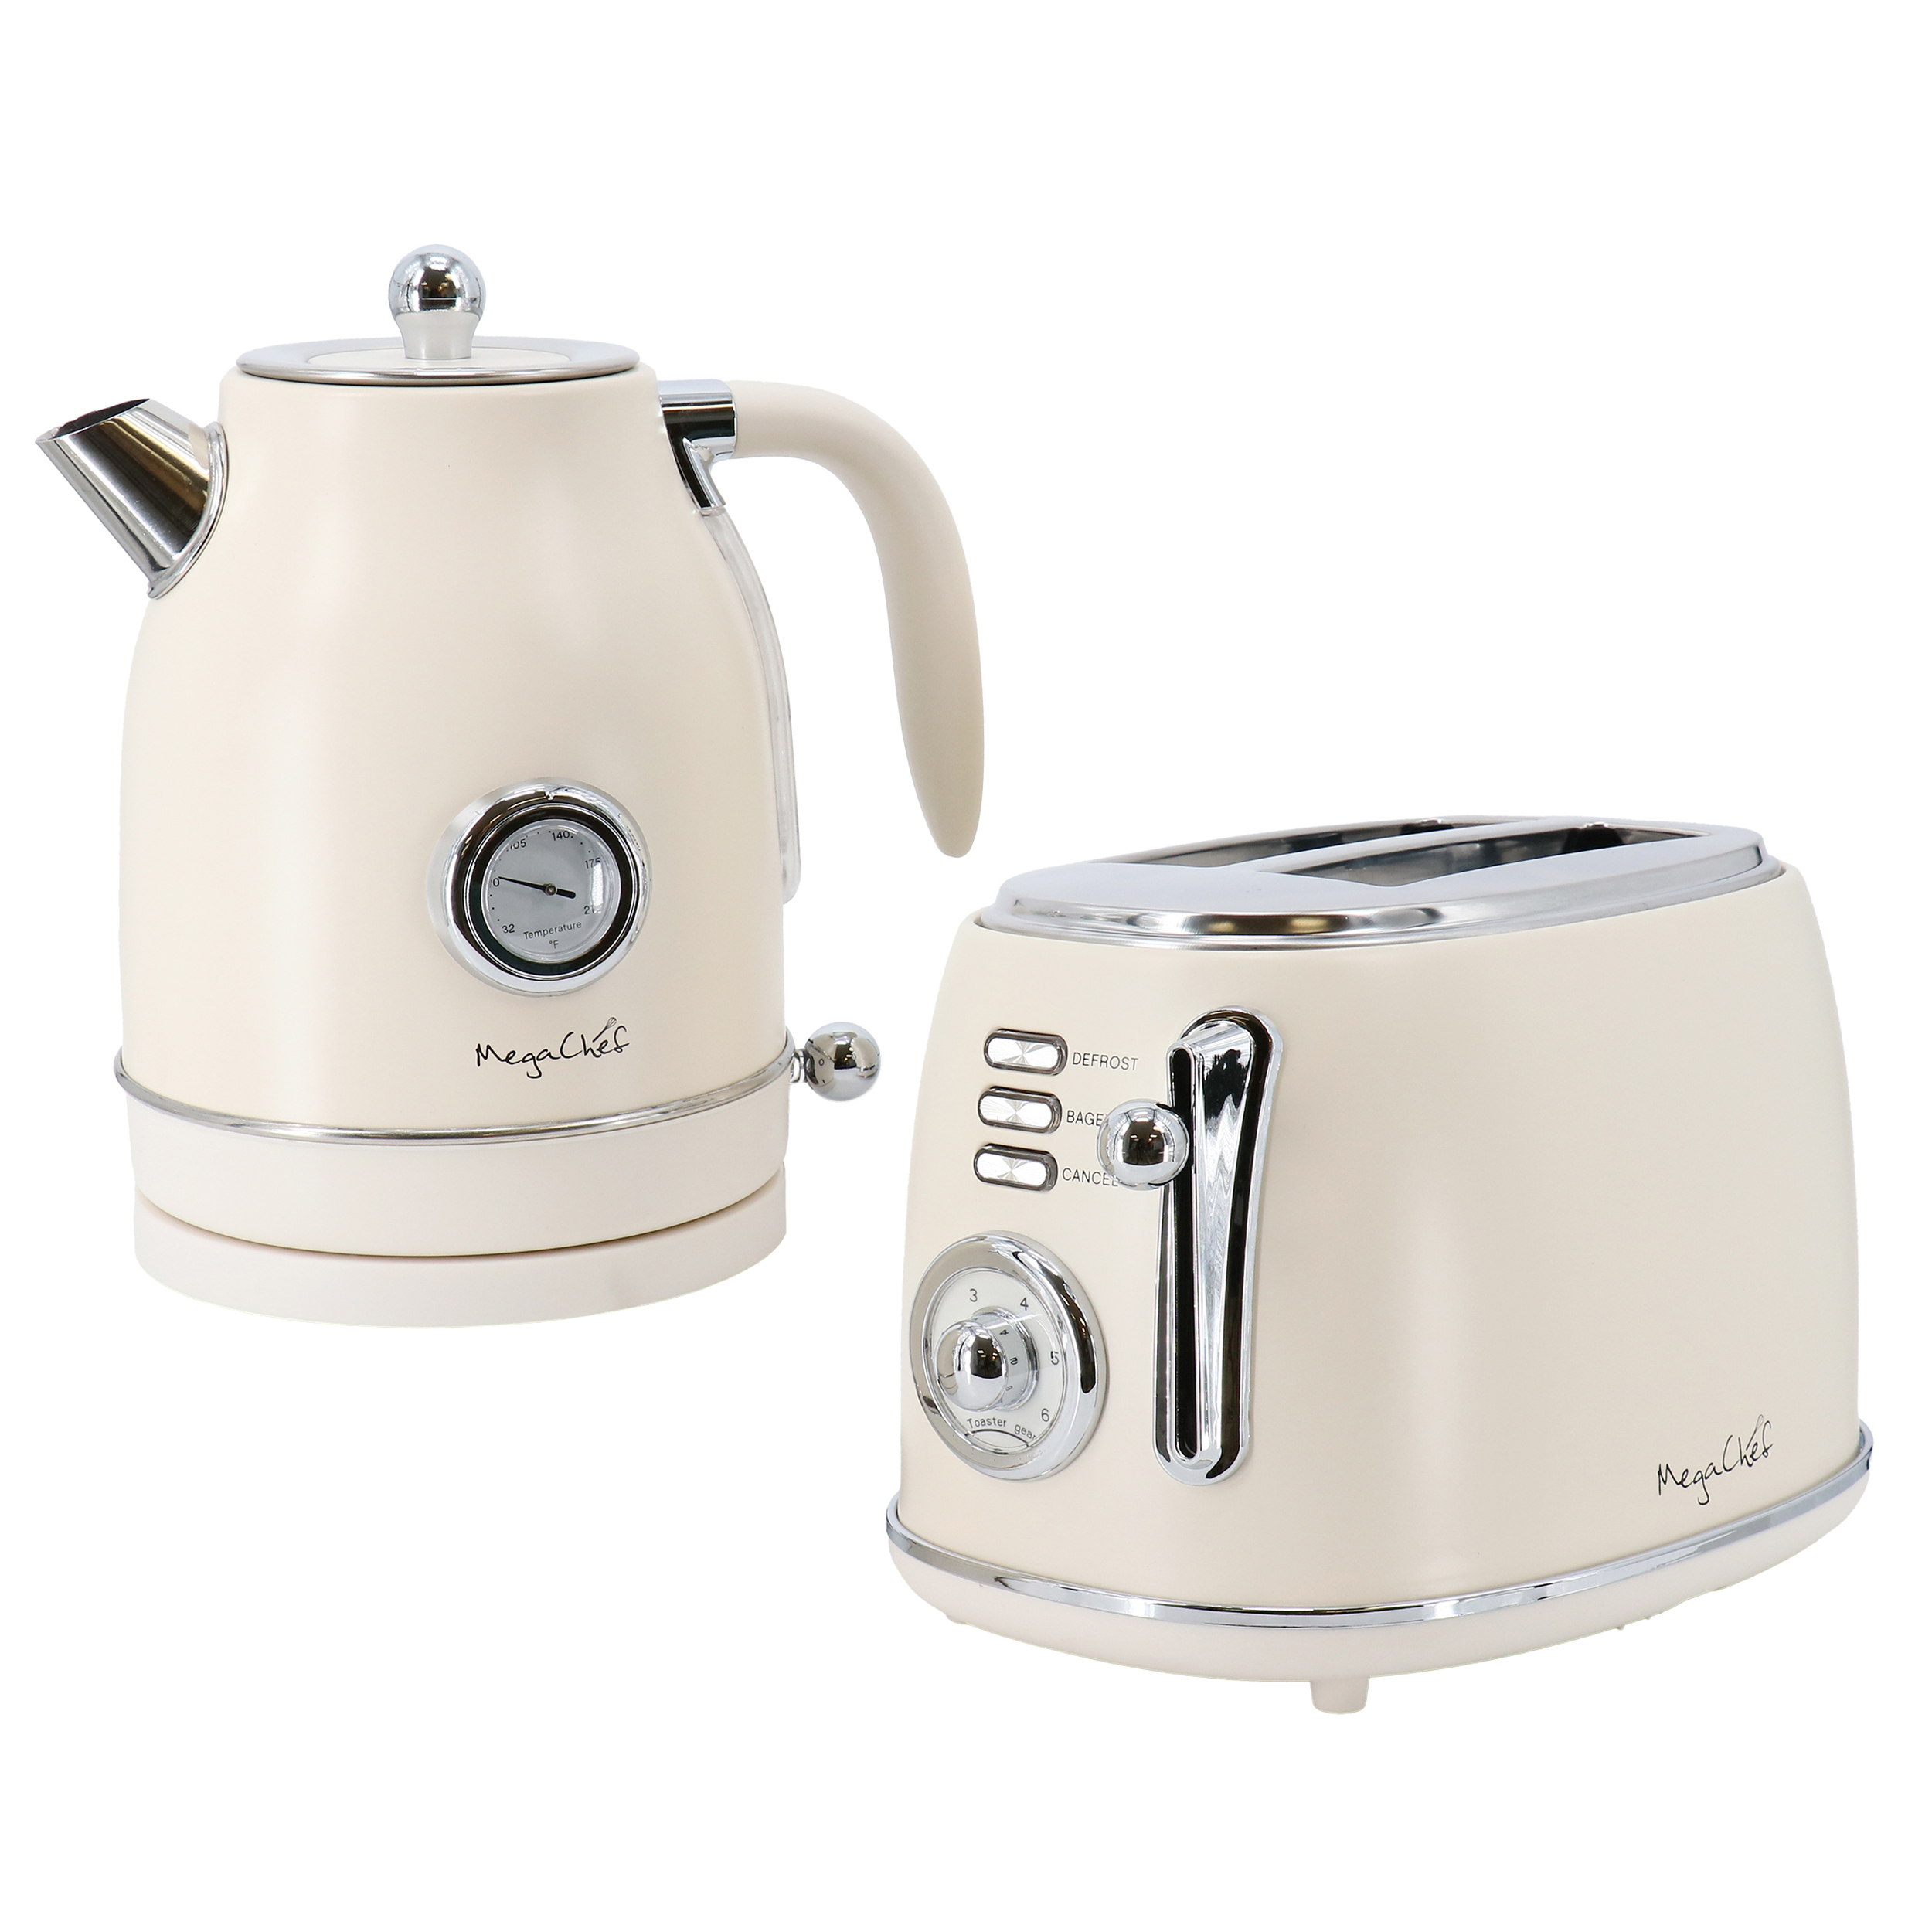 MegaChef MGKTL-1777 1.8 Litre Cordless Glass & Stainless Steel Electric Tea  Kettle with Tea Infuser 